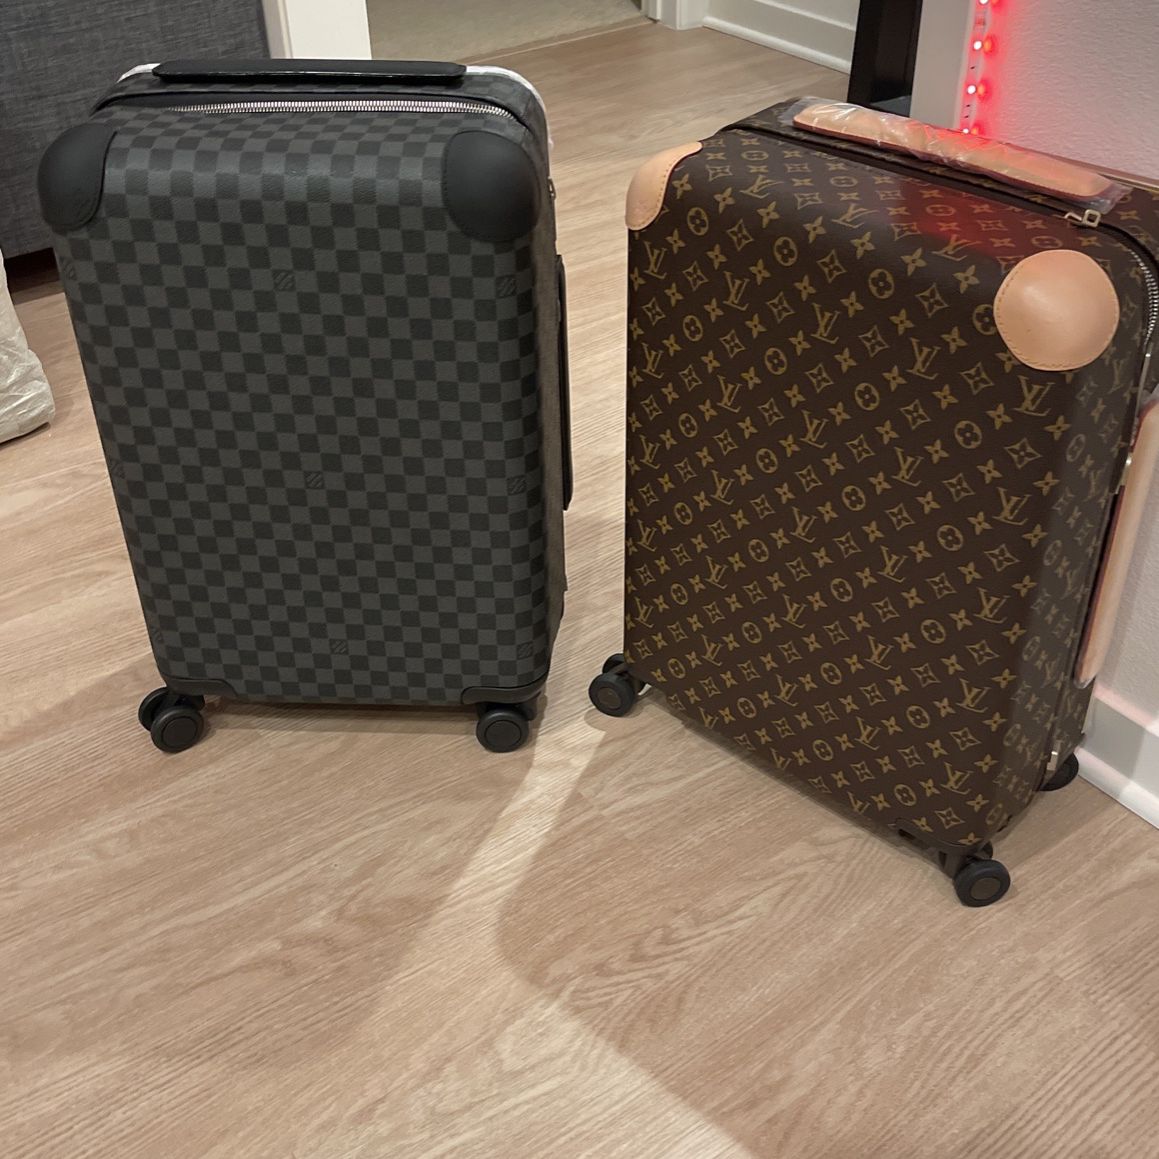 Louis Vuitton Luggage for Sale in Corona, CA - OfferUp